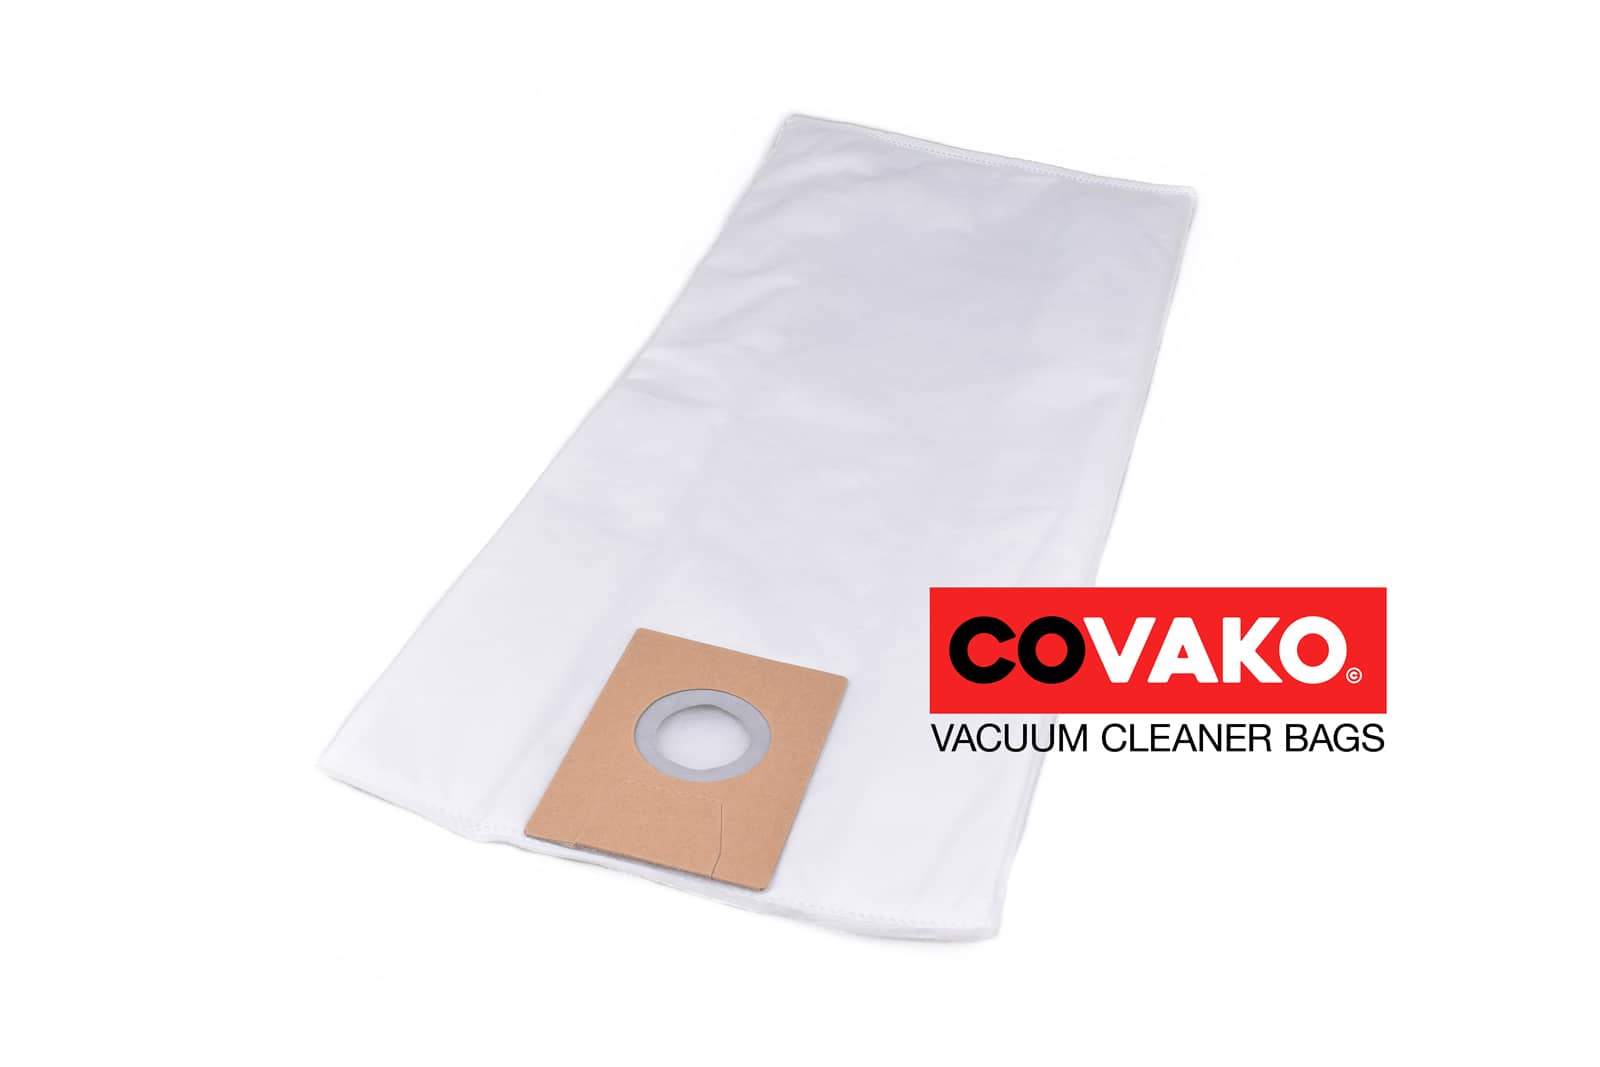 Eurom Force 1240 wet/dry / Synthesis - Eurom vacuum cleaner bags